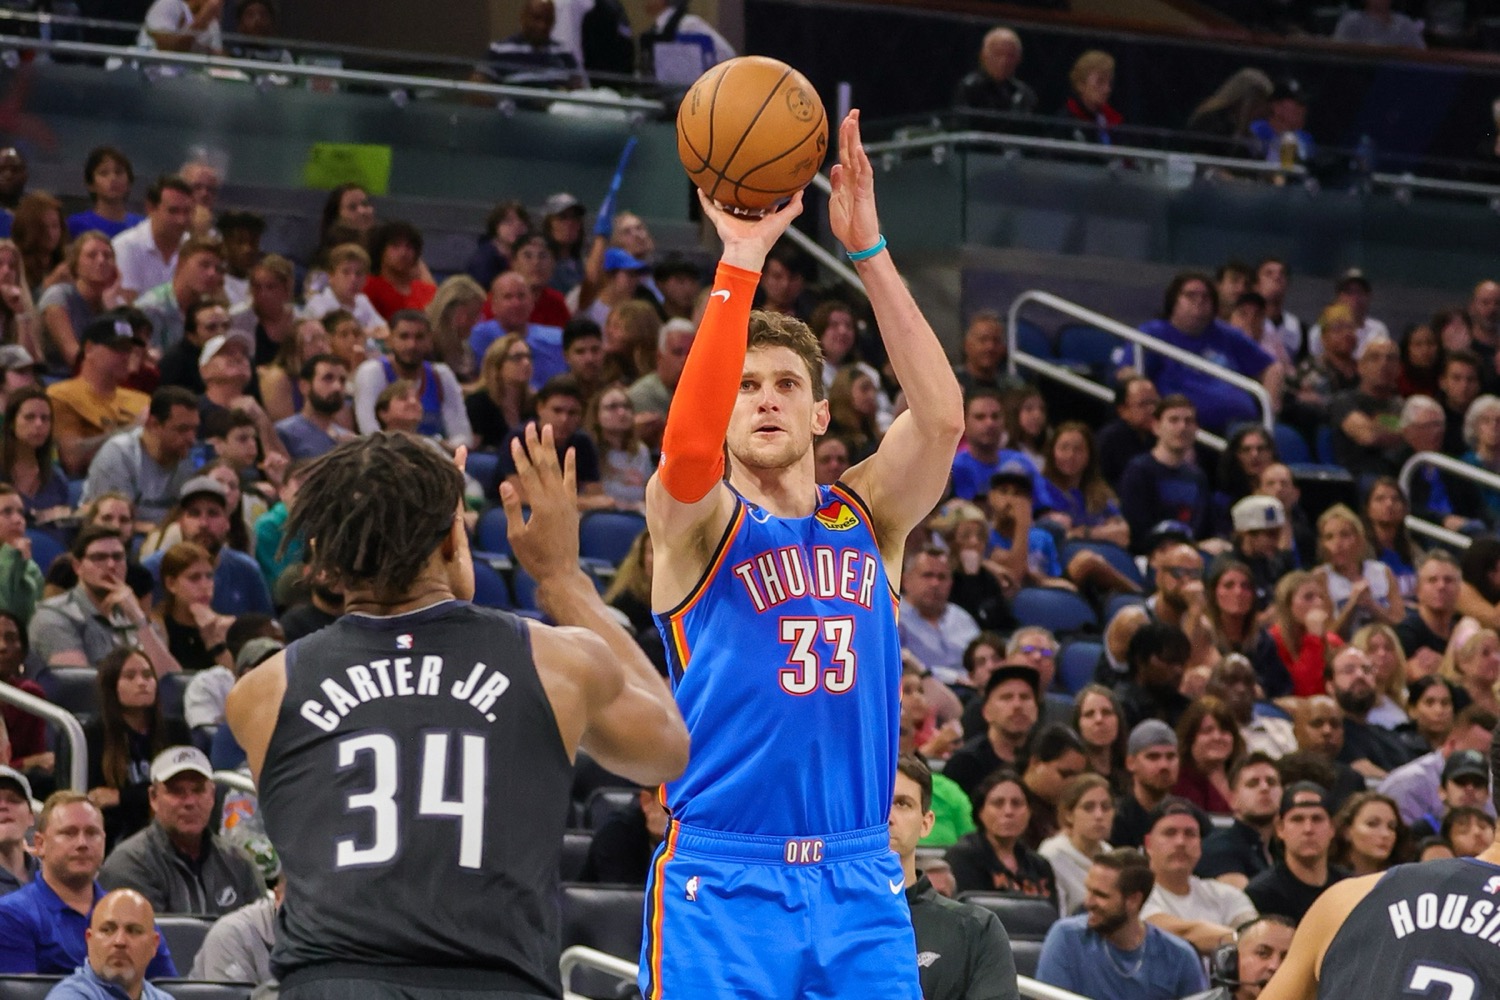 Thunder Signs Mike Muscala